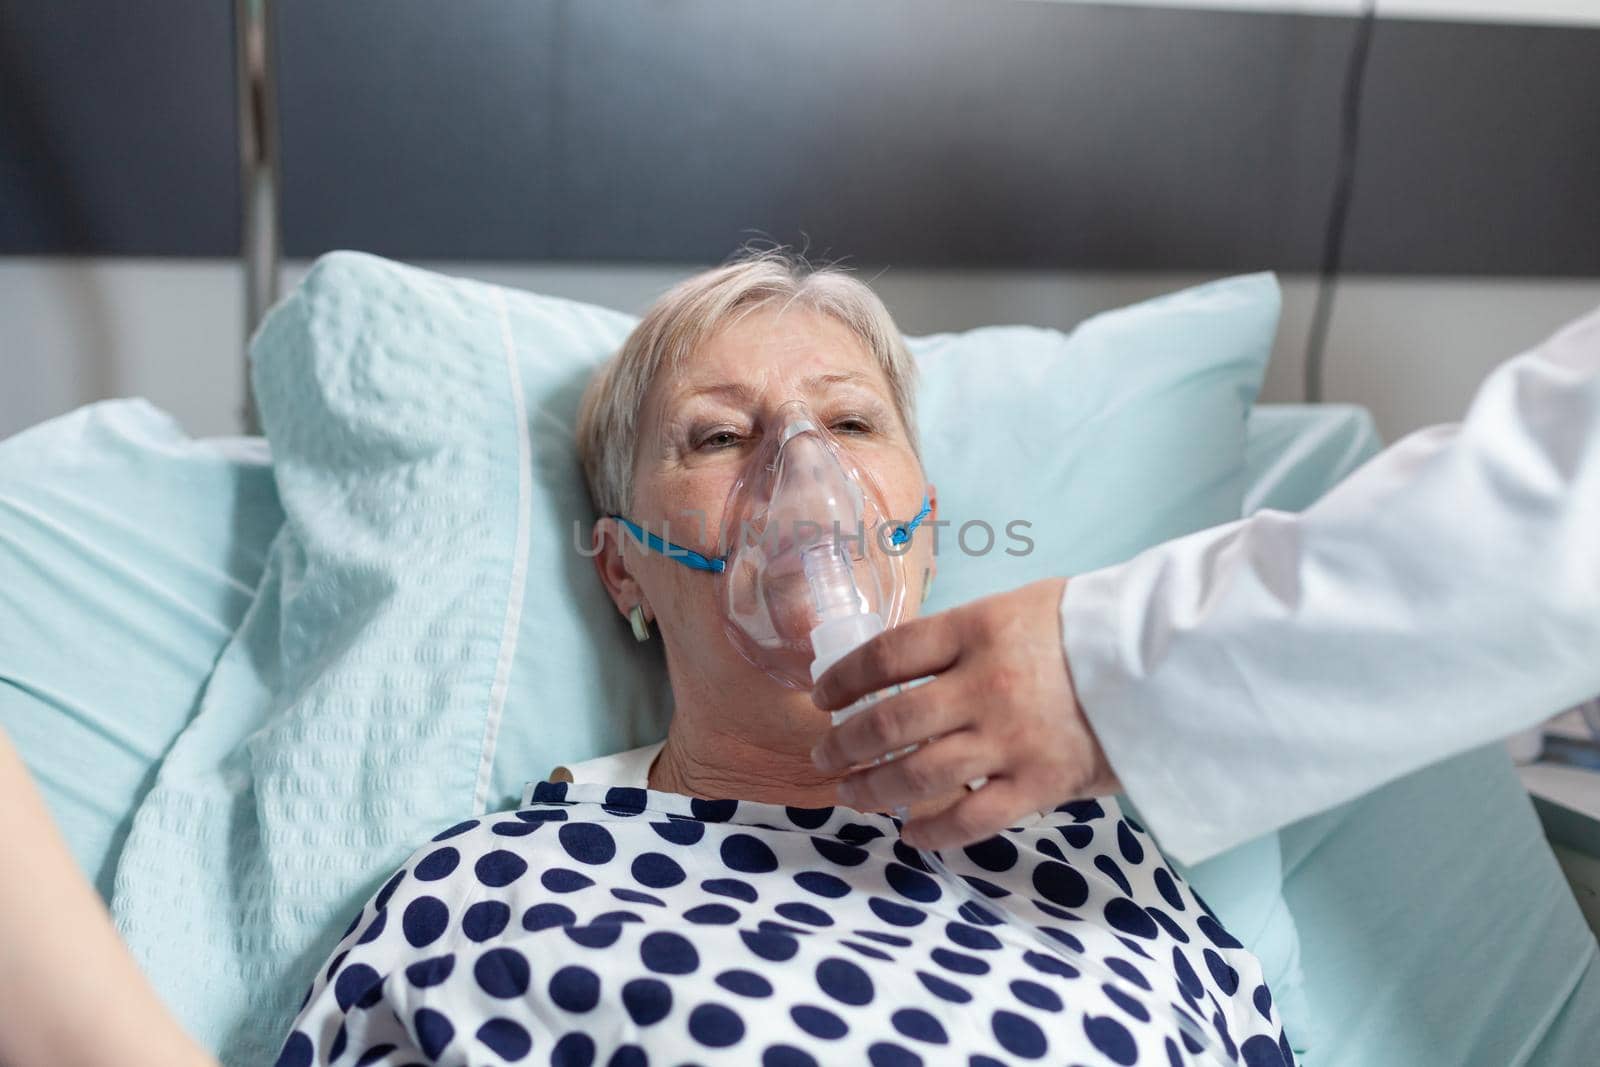 Doctor and nurse supervising senior woman breathing with oxygen mask, laying in bed because of pulmonary disease. Patient laying in bed with iv dip bag attached.